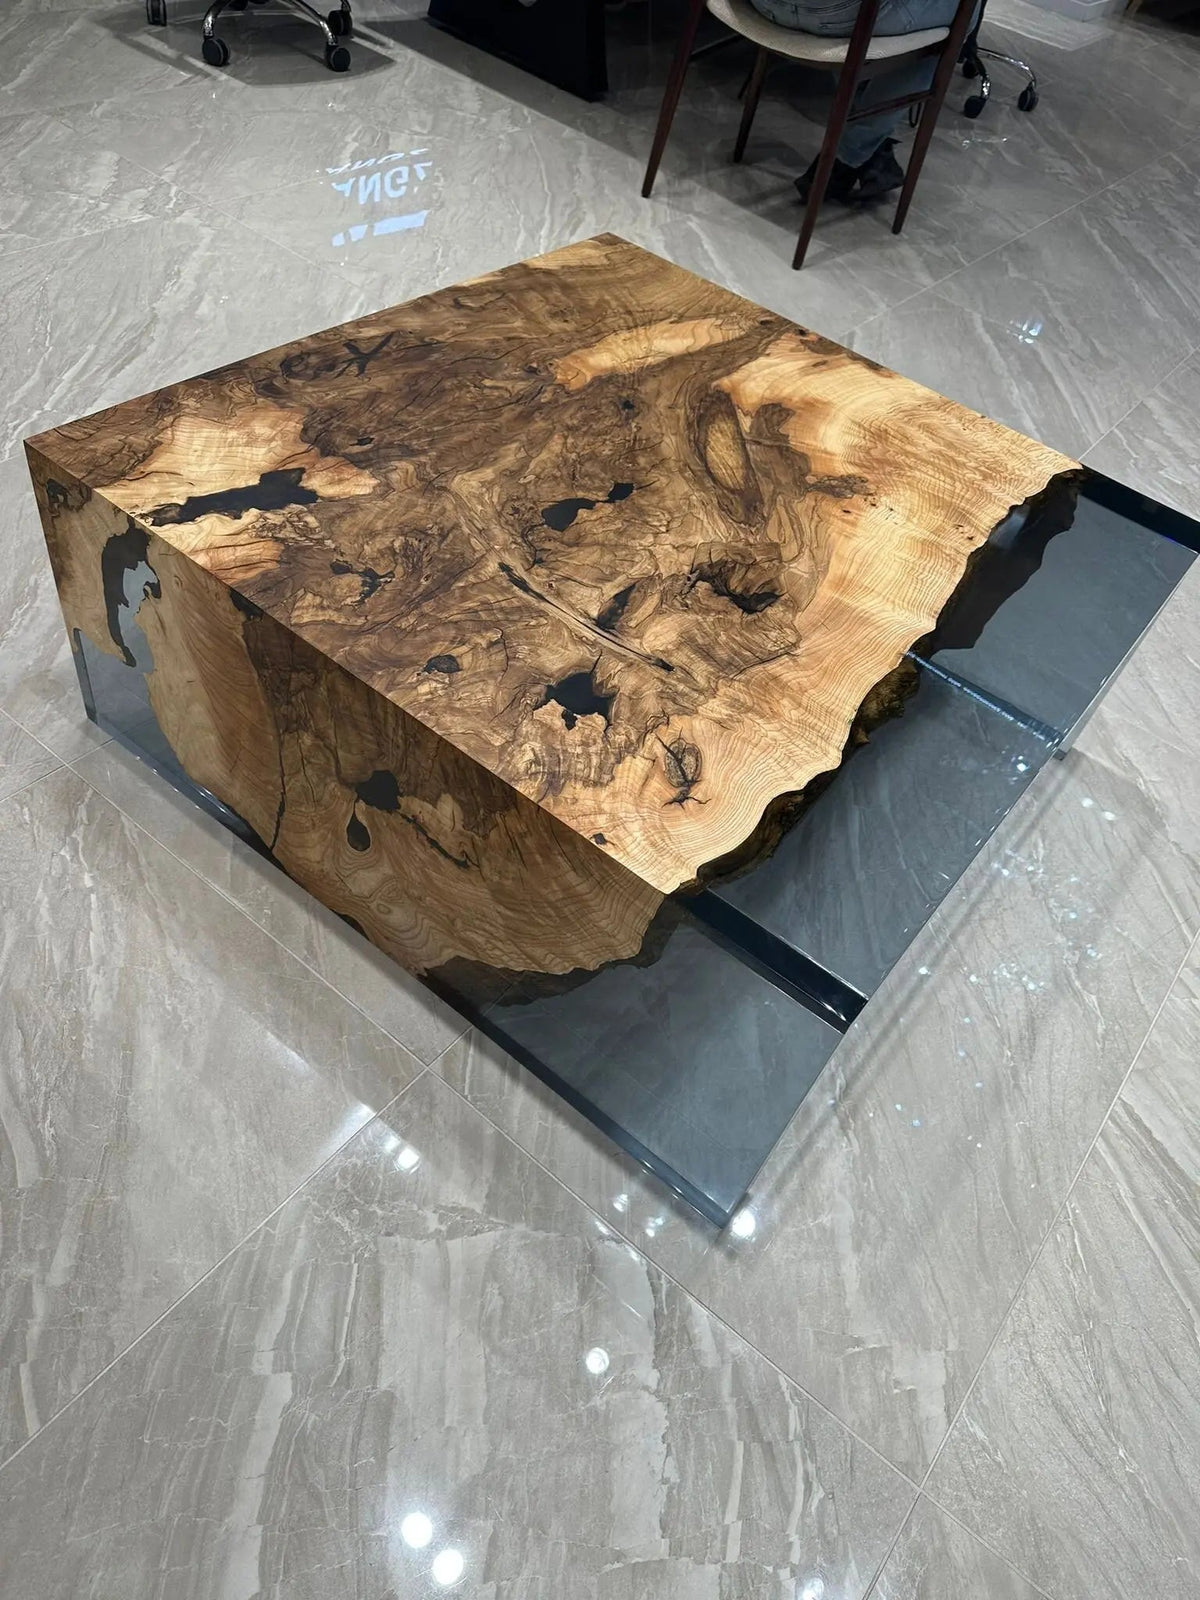 Waterfall Live Edge Resin Table | Custom Order Table | Living Room Table On Wooden